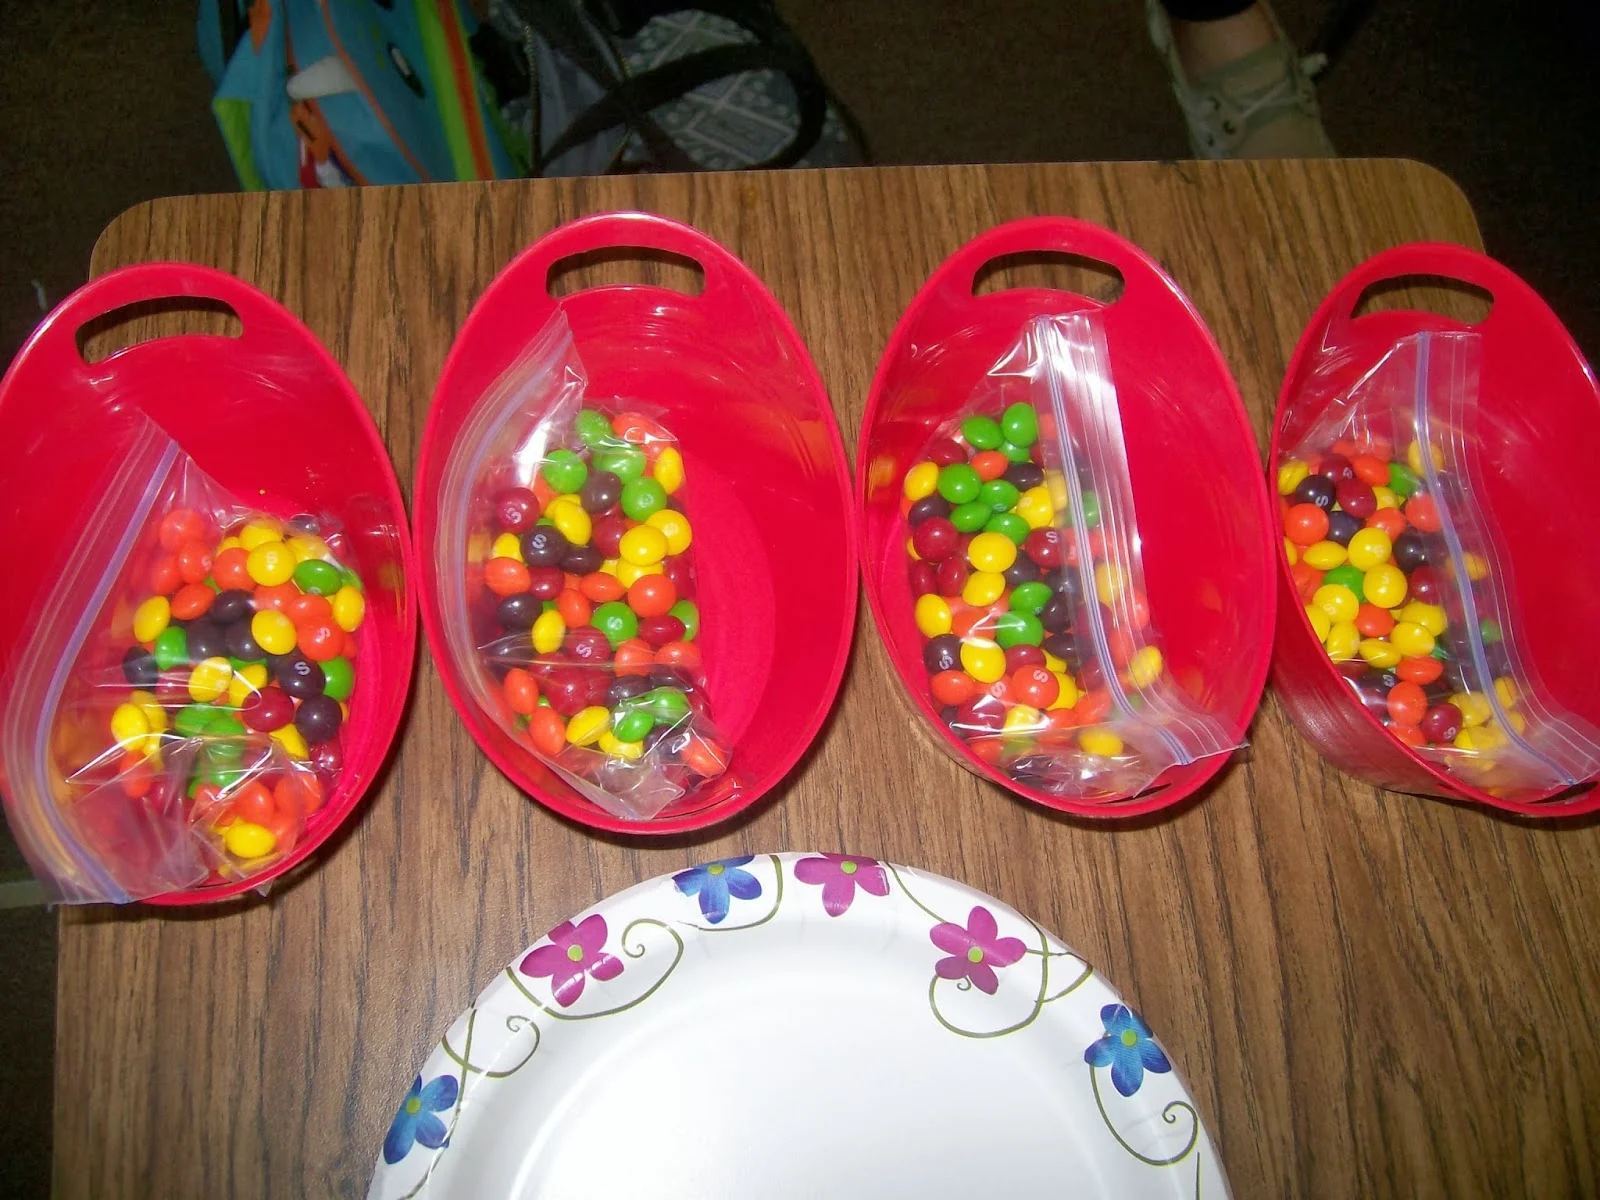 Modeling Exponential Growth and Decay Activity using Skittles High School Math Algebra Classroom